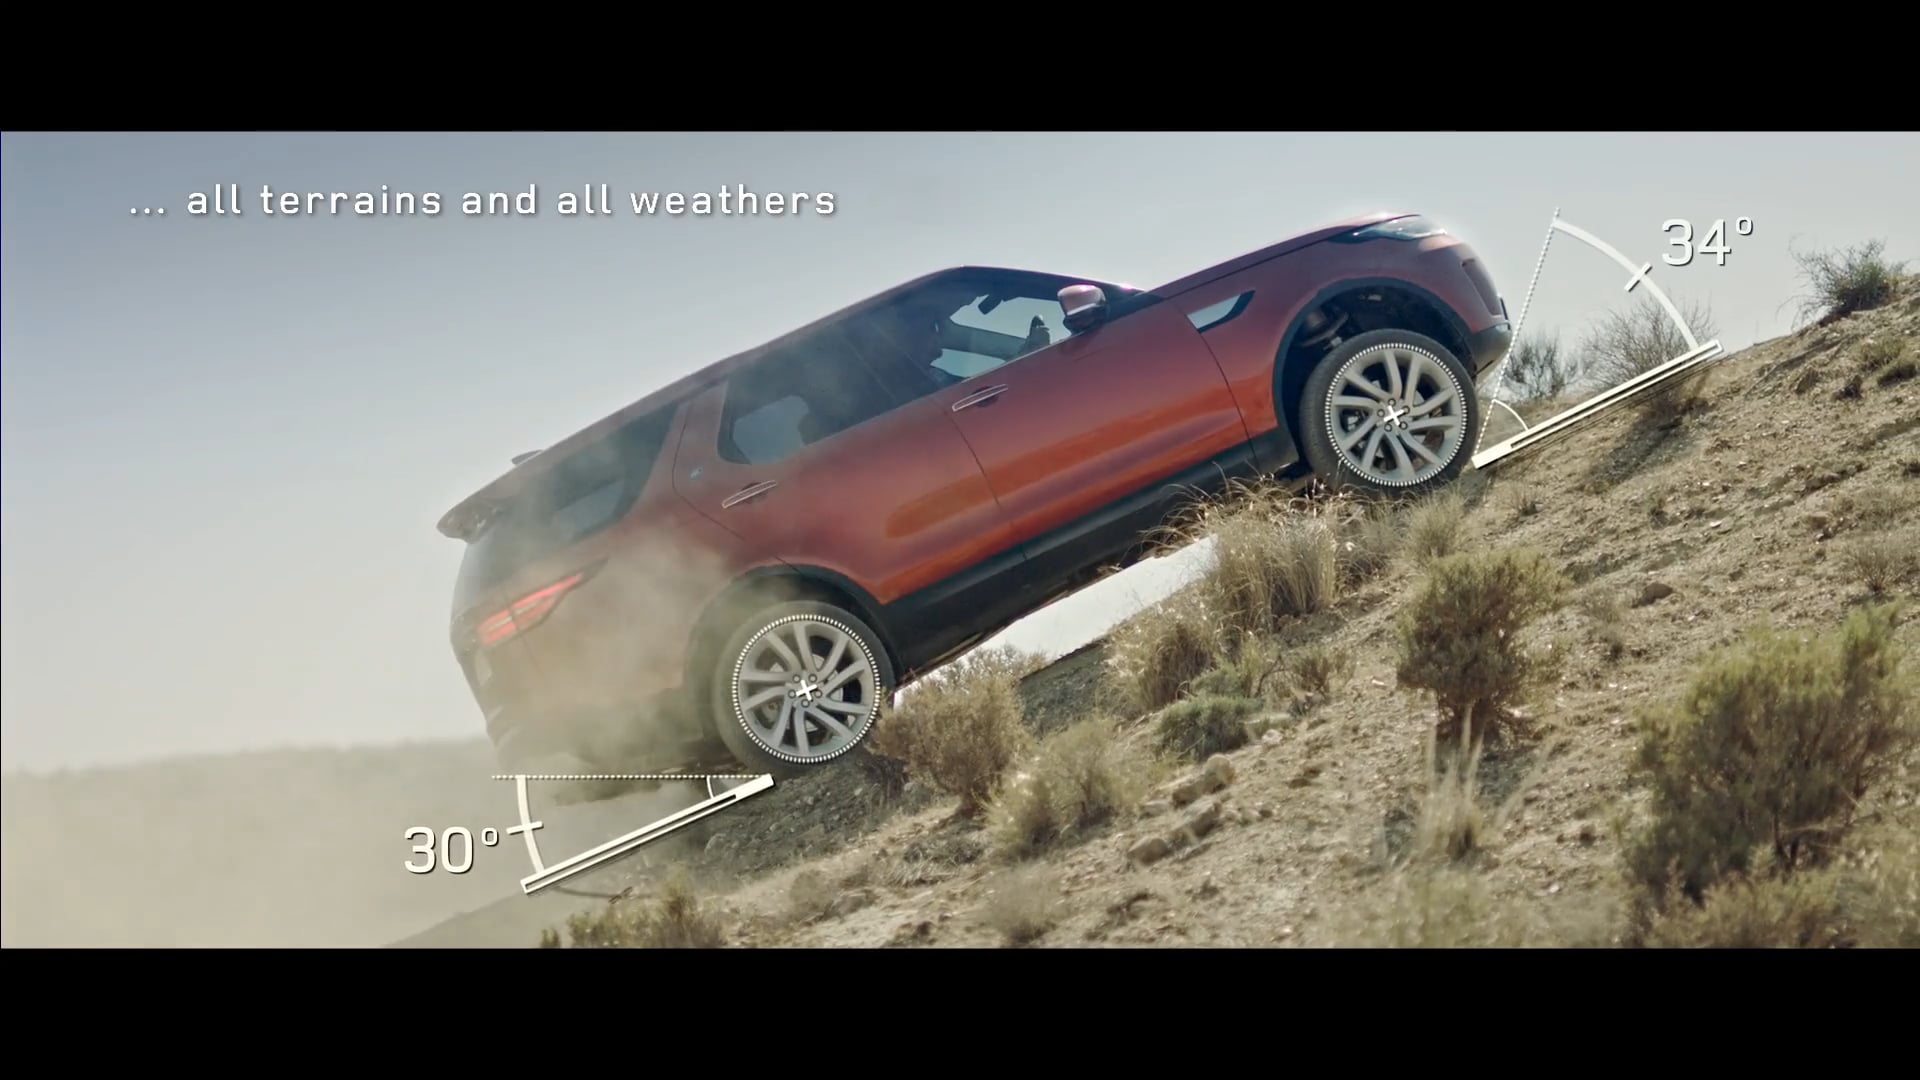 Features: 2018 Land Rover Discovery